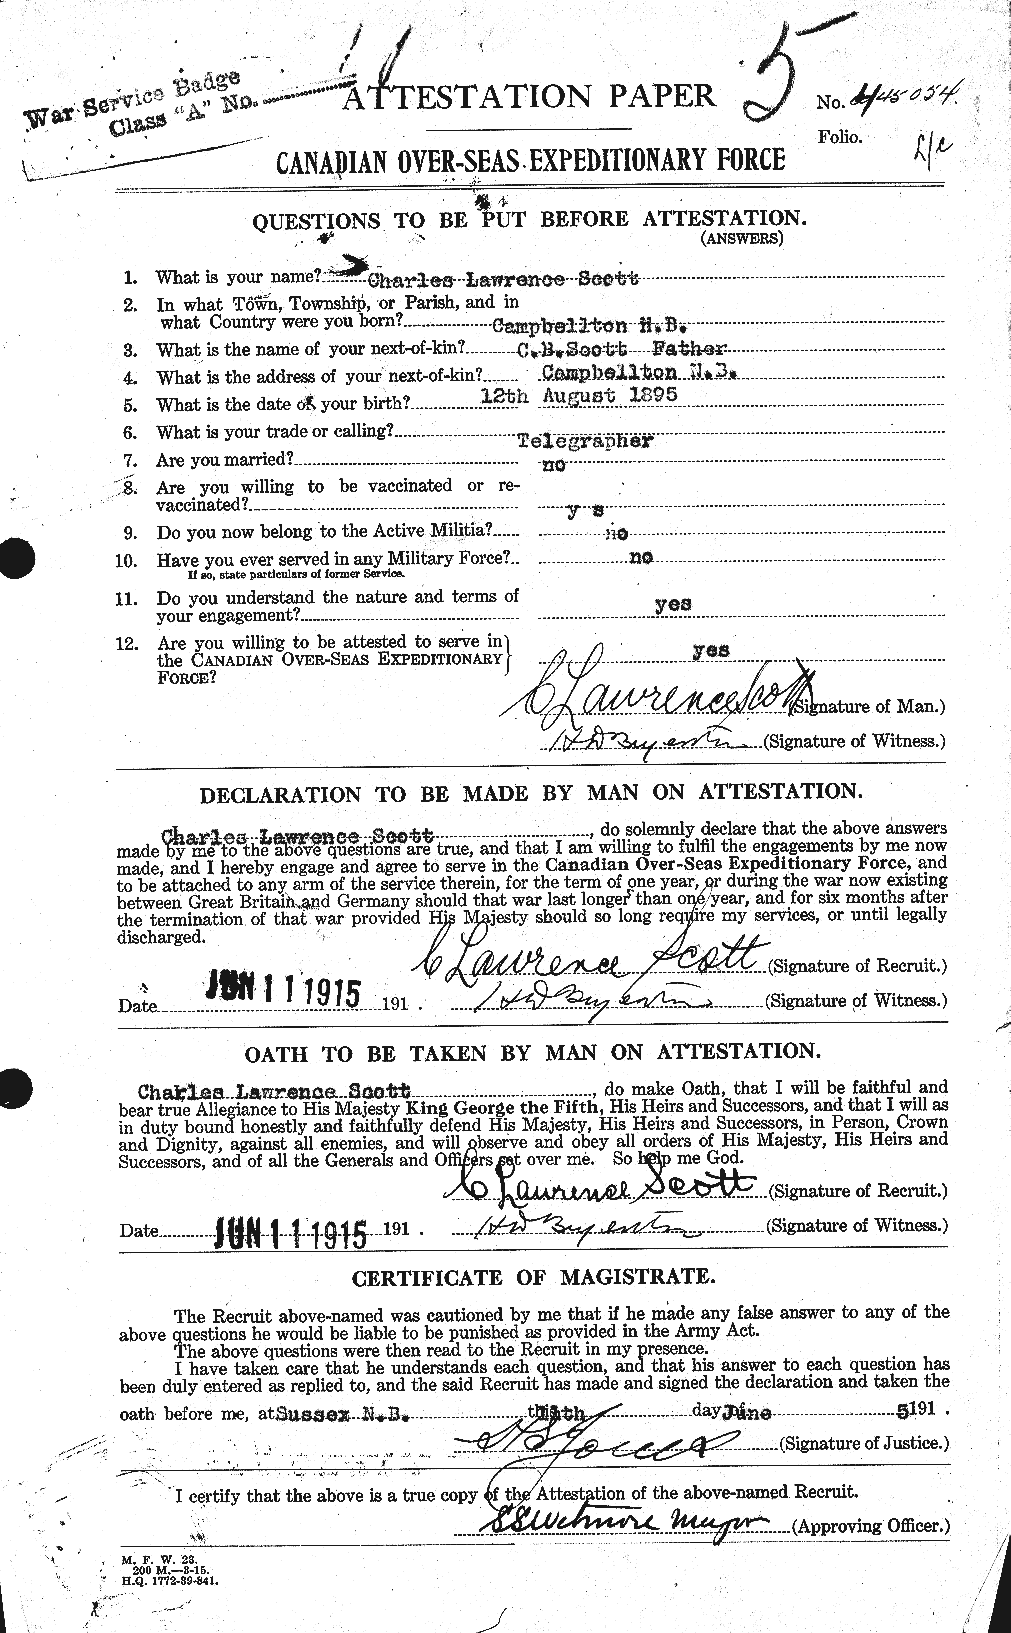 Personnel Records of the First World War - CEF 085885a